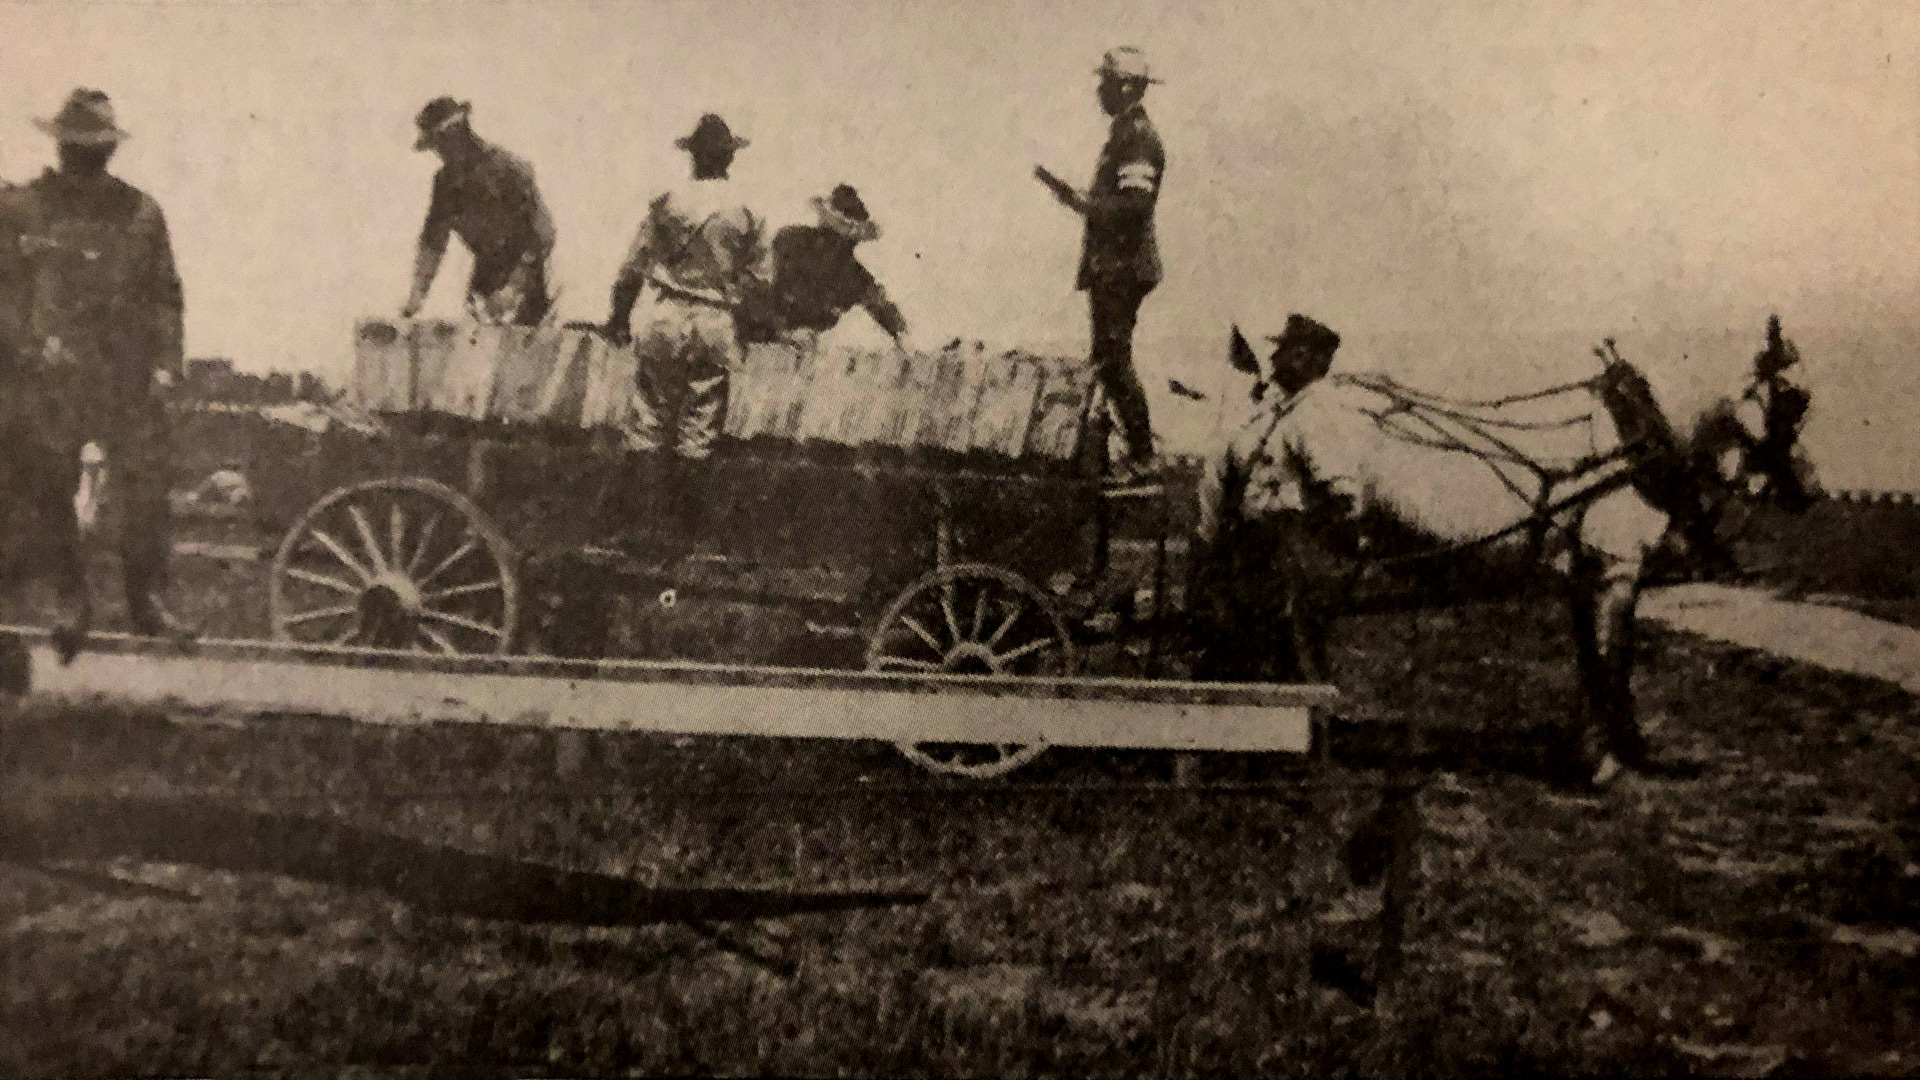 Horse-drawn carts in Jacksonville at the 1916 National Matches